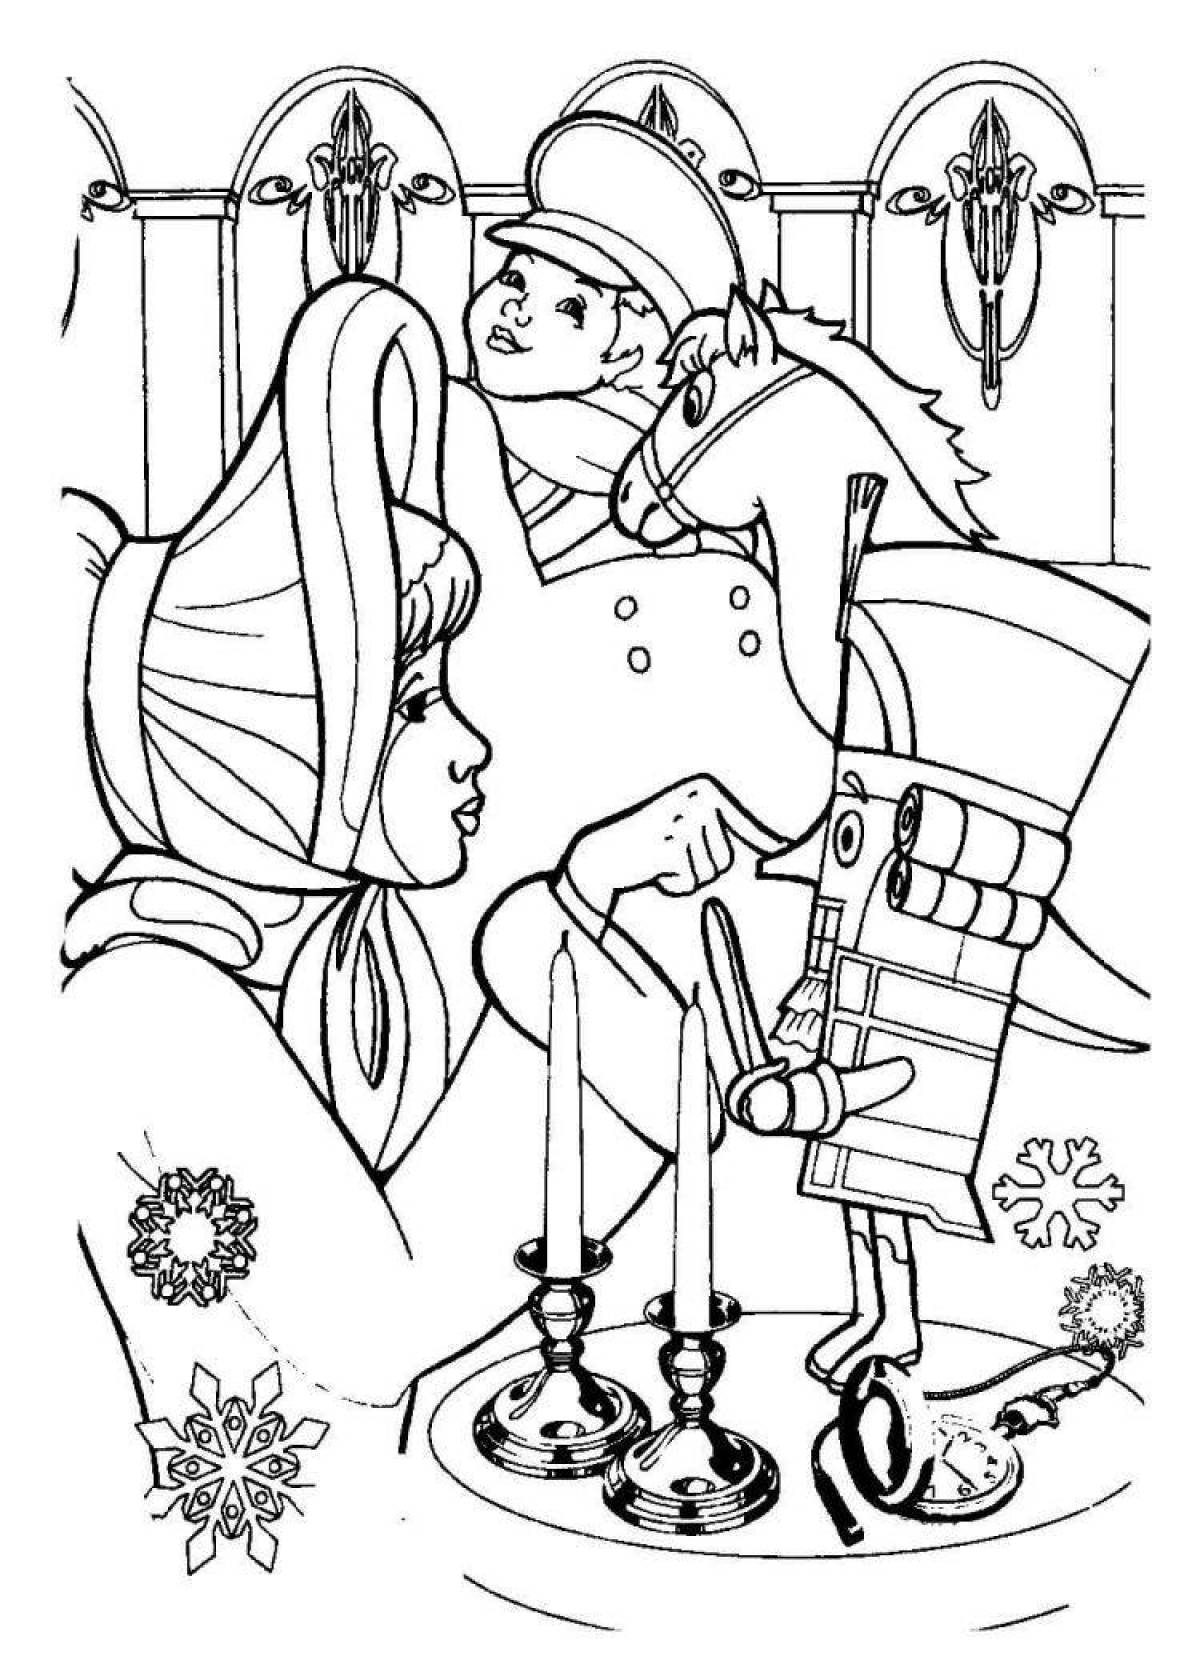 Glorious mouse king coloring page